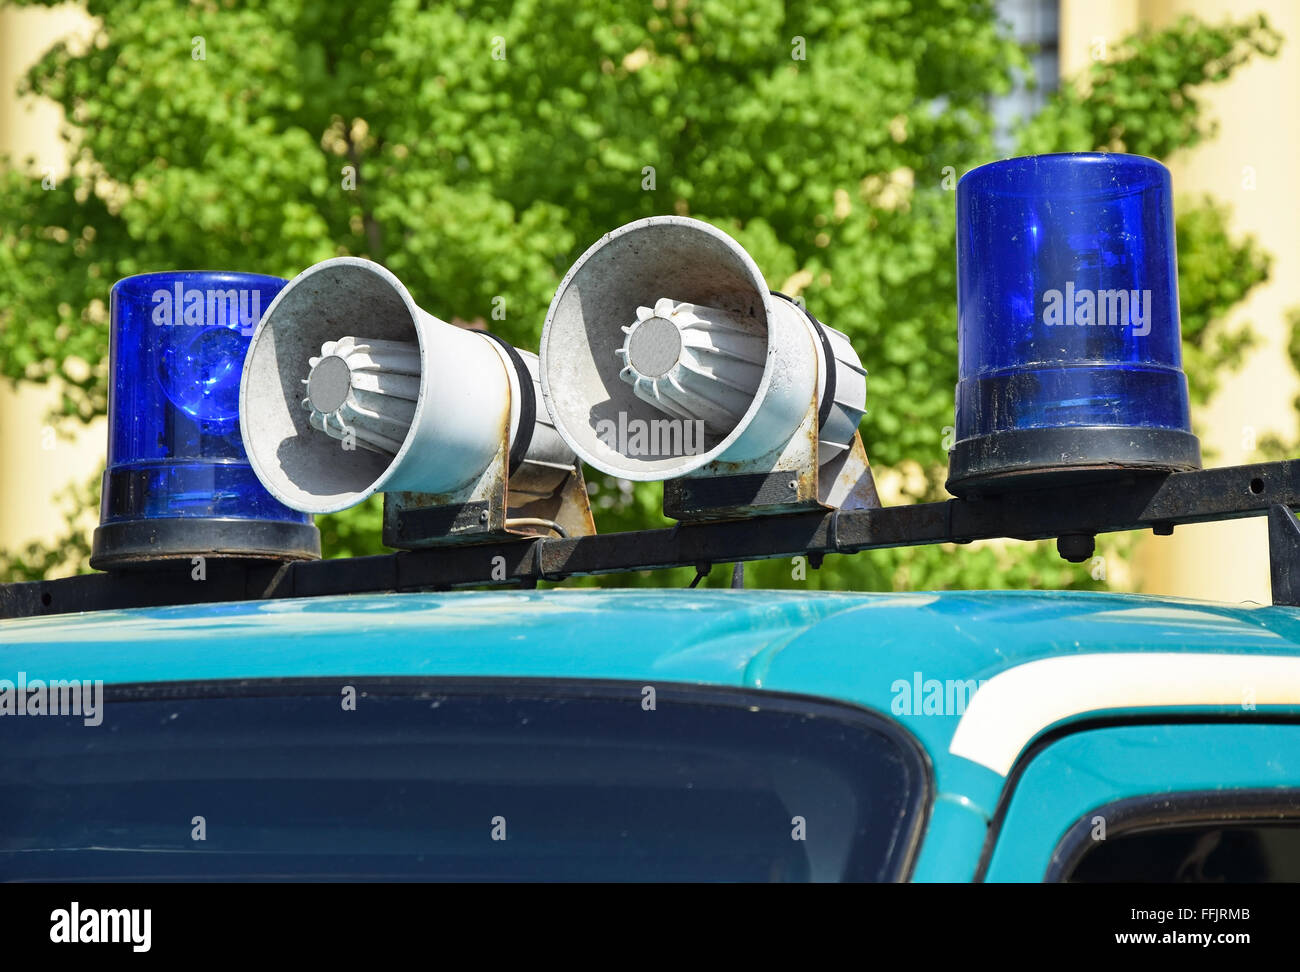 Sirens on the police car Stock Photo